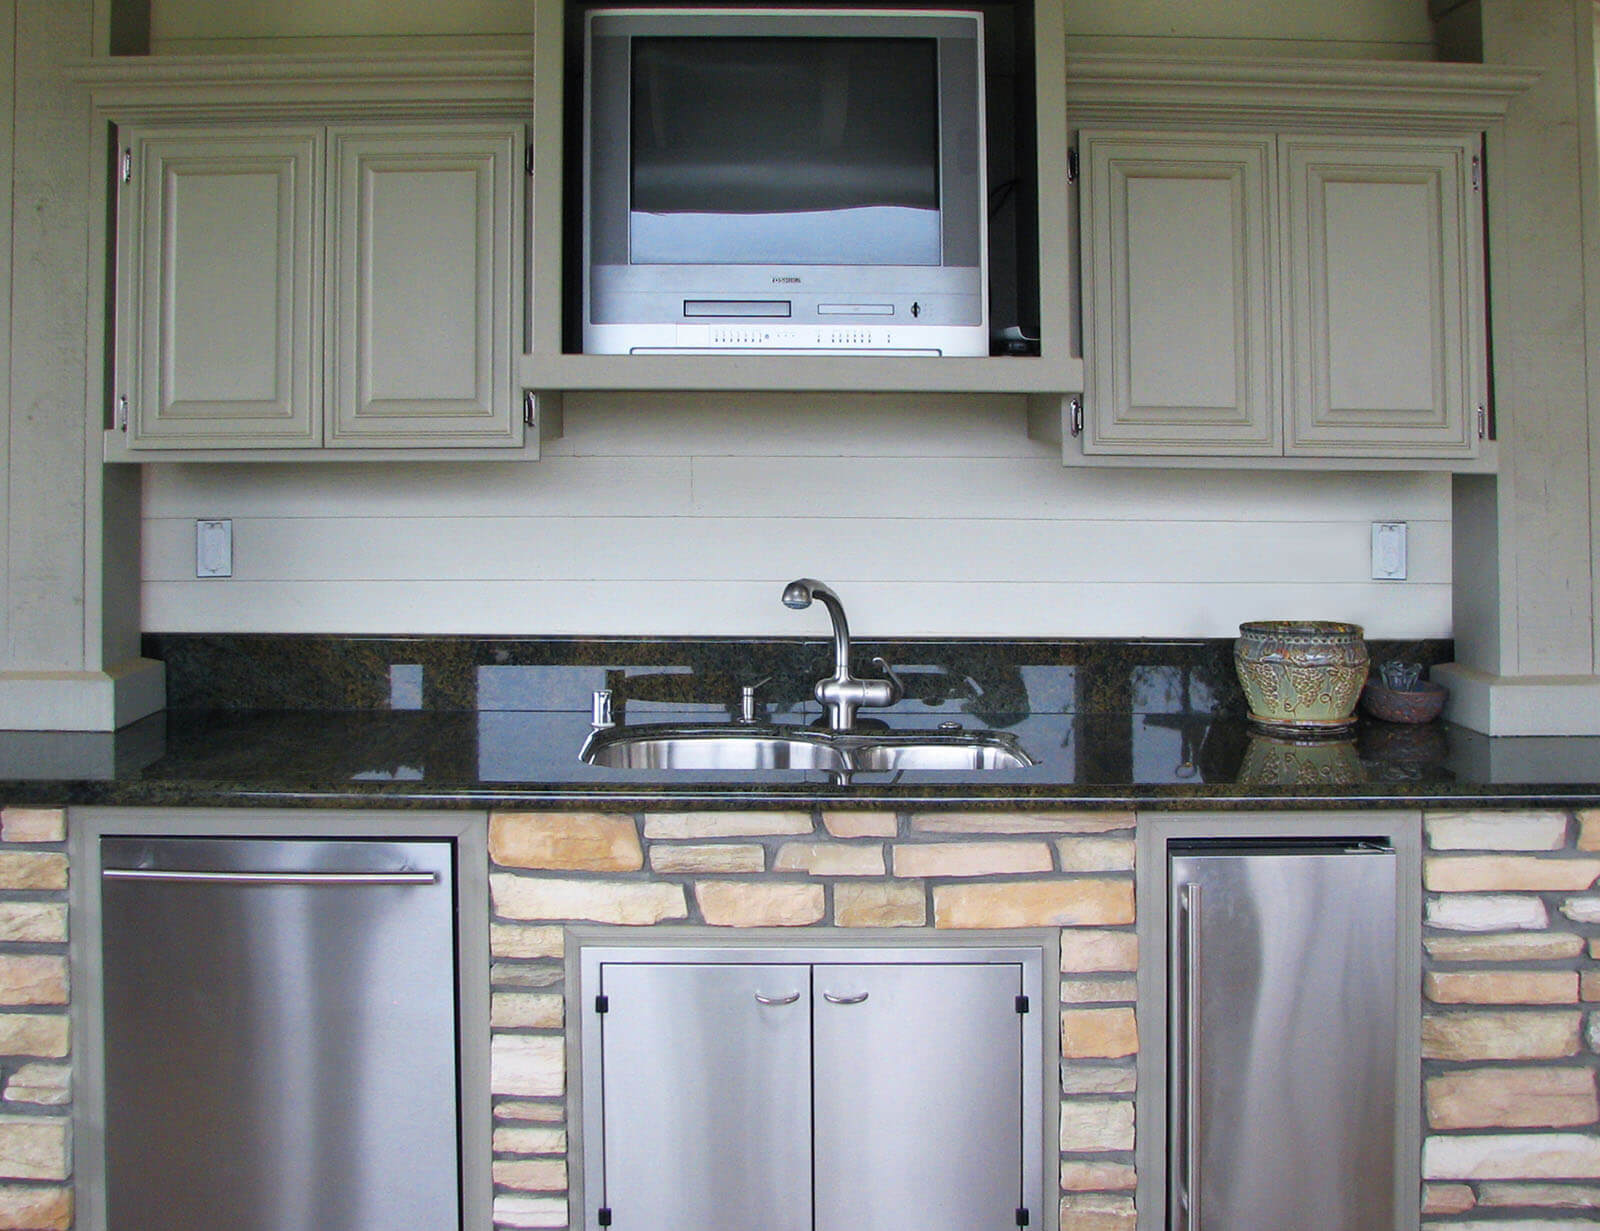 Black stone countertop, partitioned sink, dishwasher, stow space, and mini-fridge